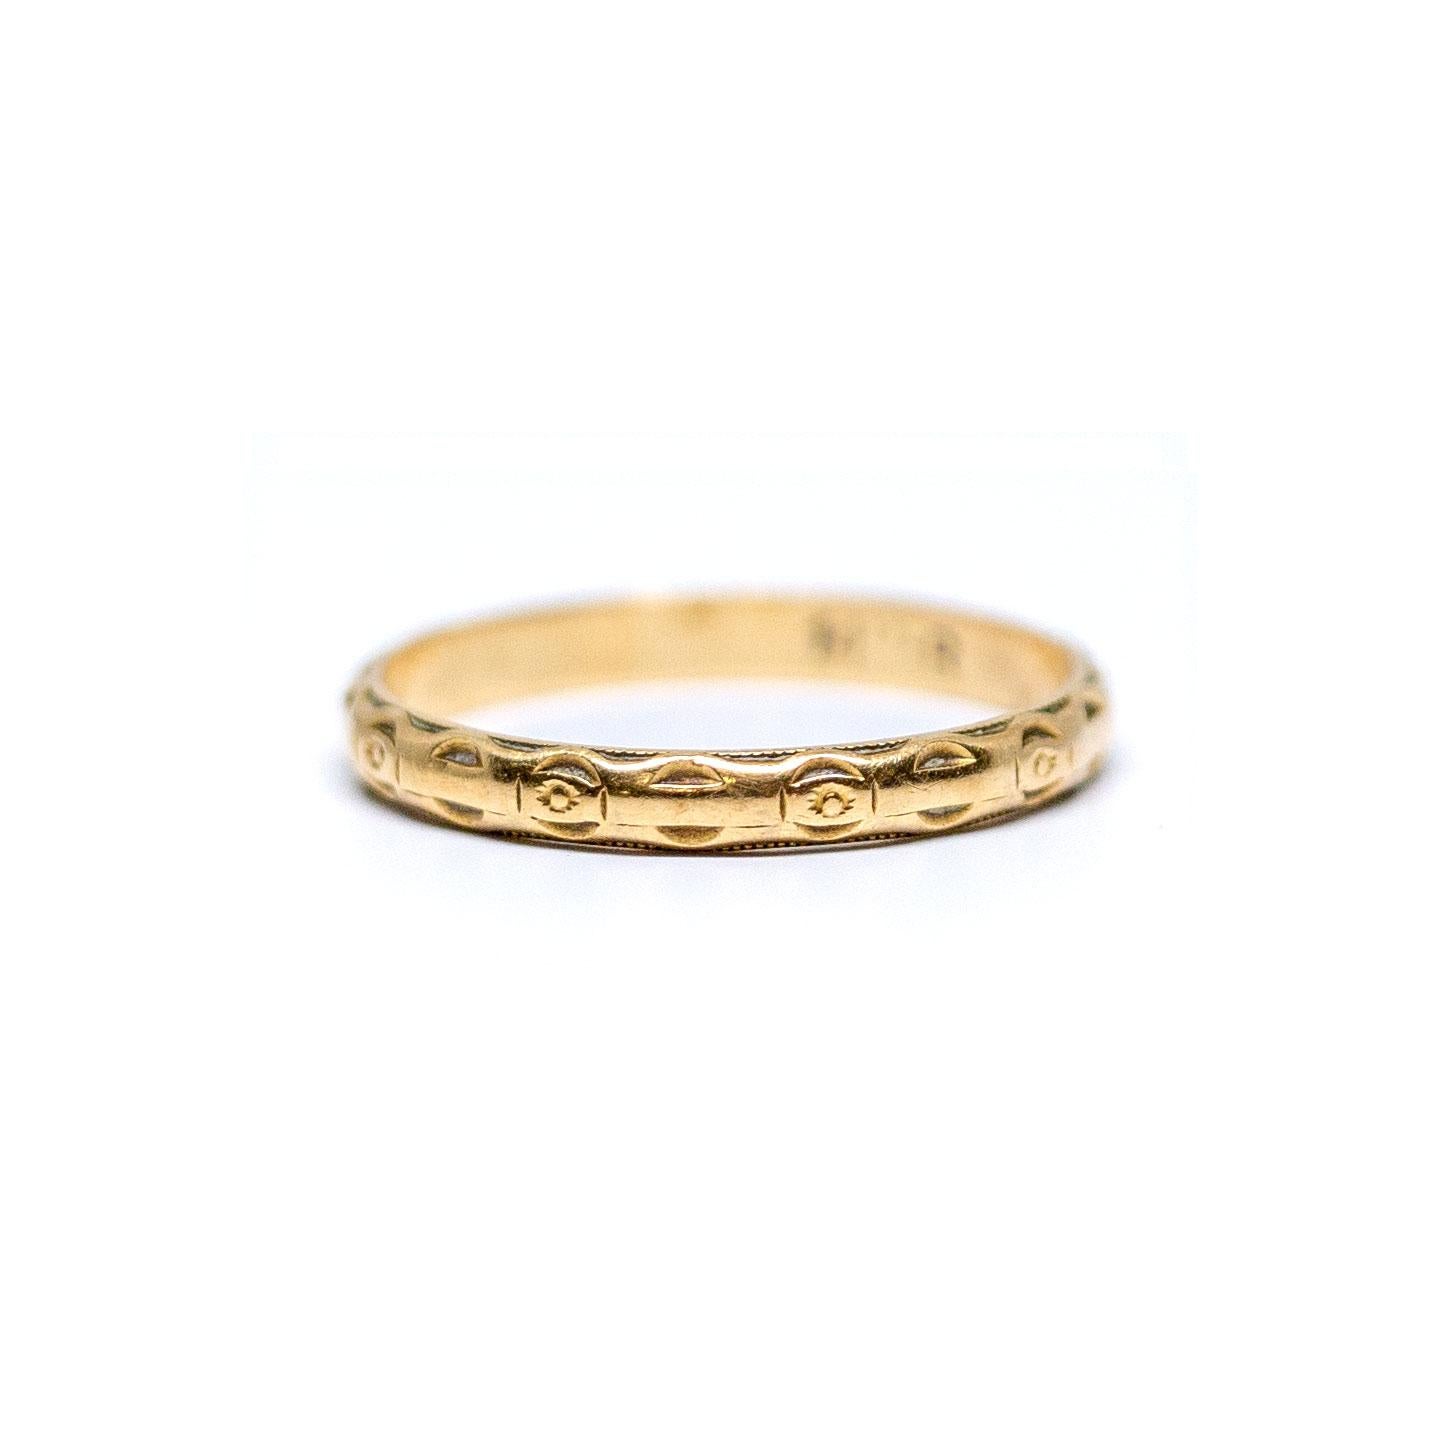 Description: 
This piece is a genuine 1930's 14k yellow gold wedding band! This beautiful dainty band is an excellent example of early 20th century style! Likely from the 1930's this Art Deco beauty features a great deep relief carved design all of